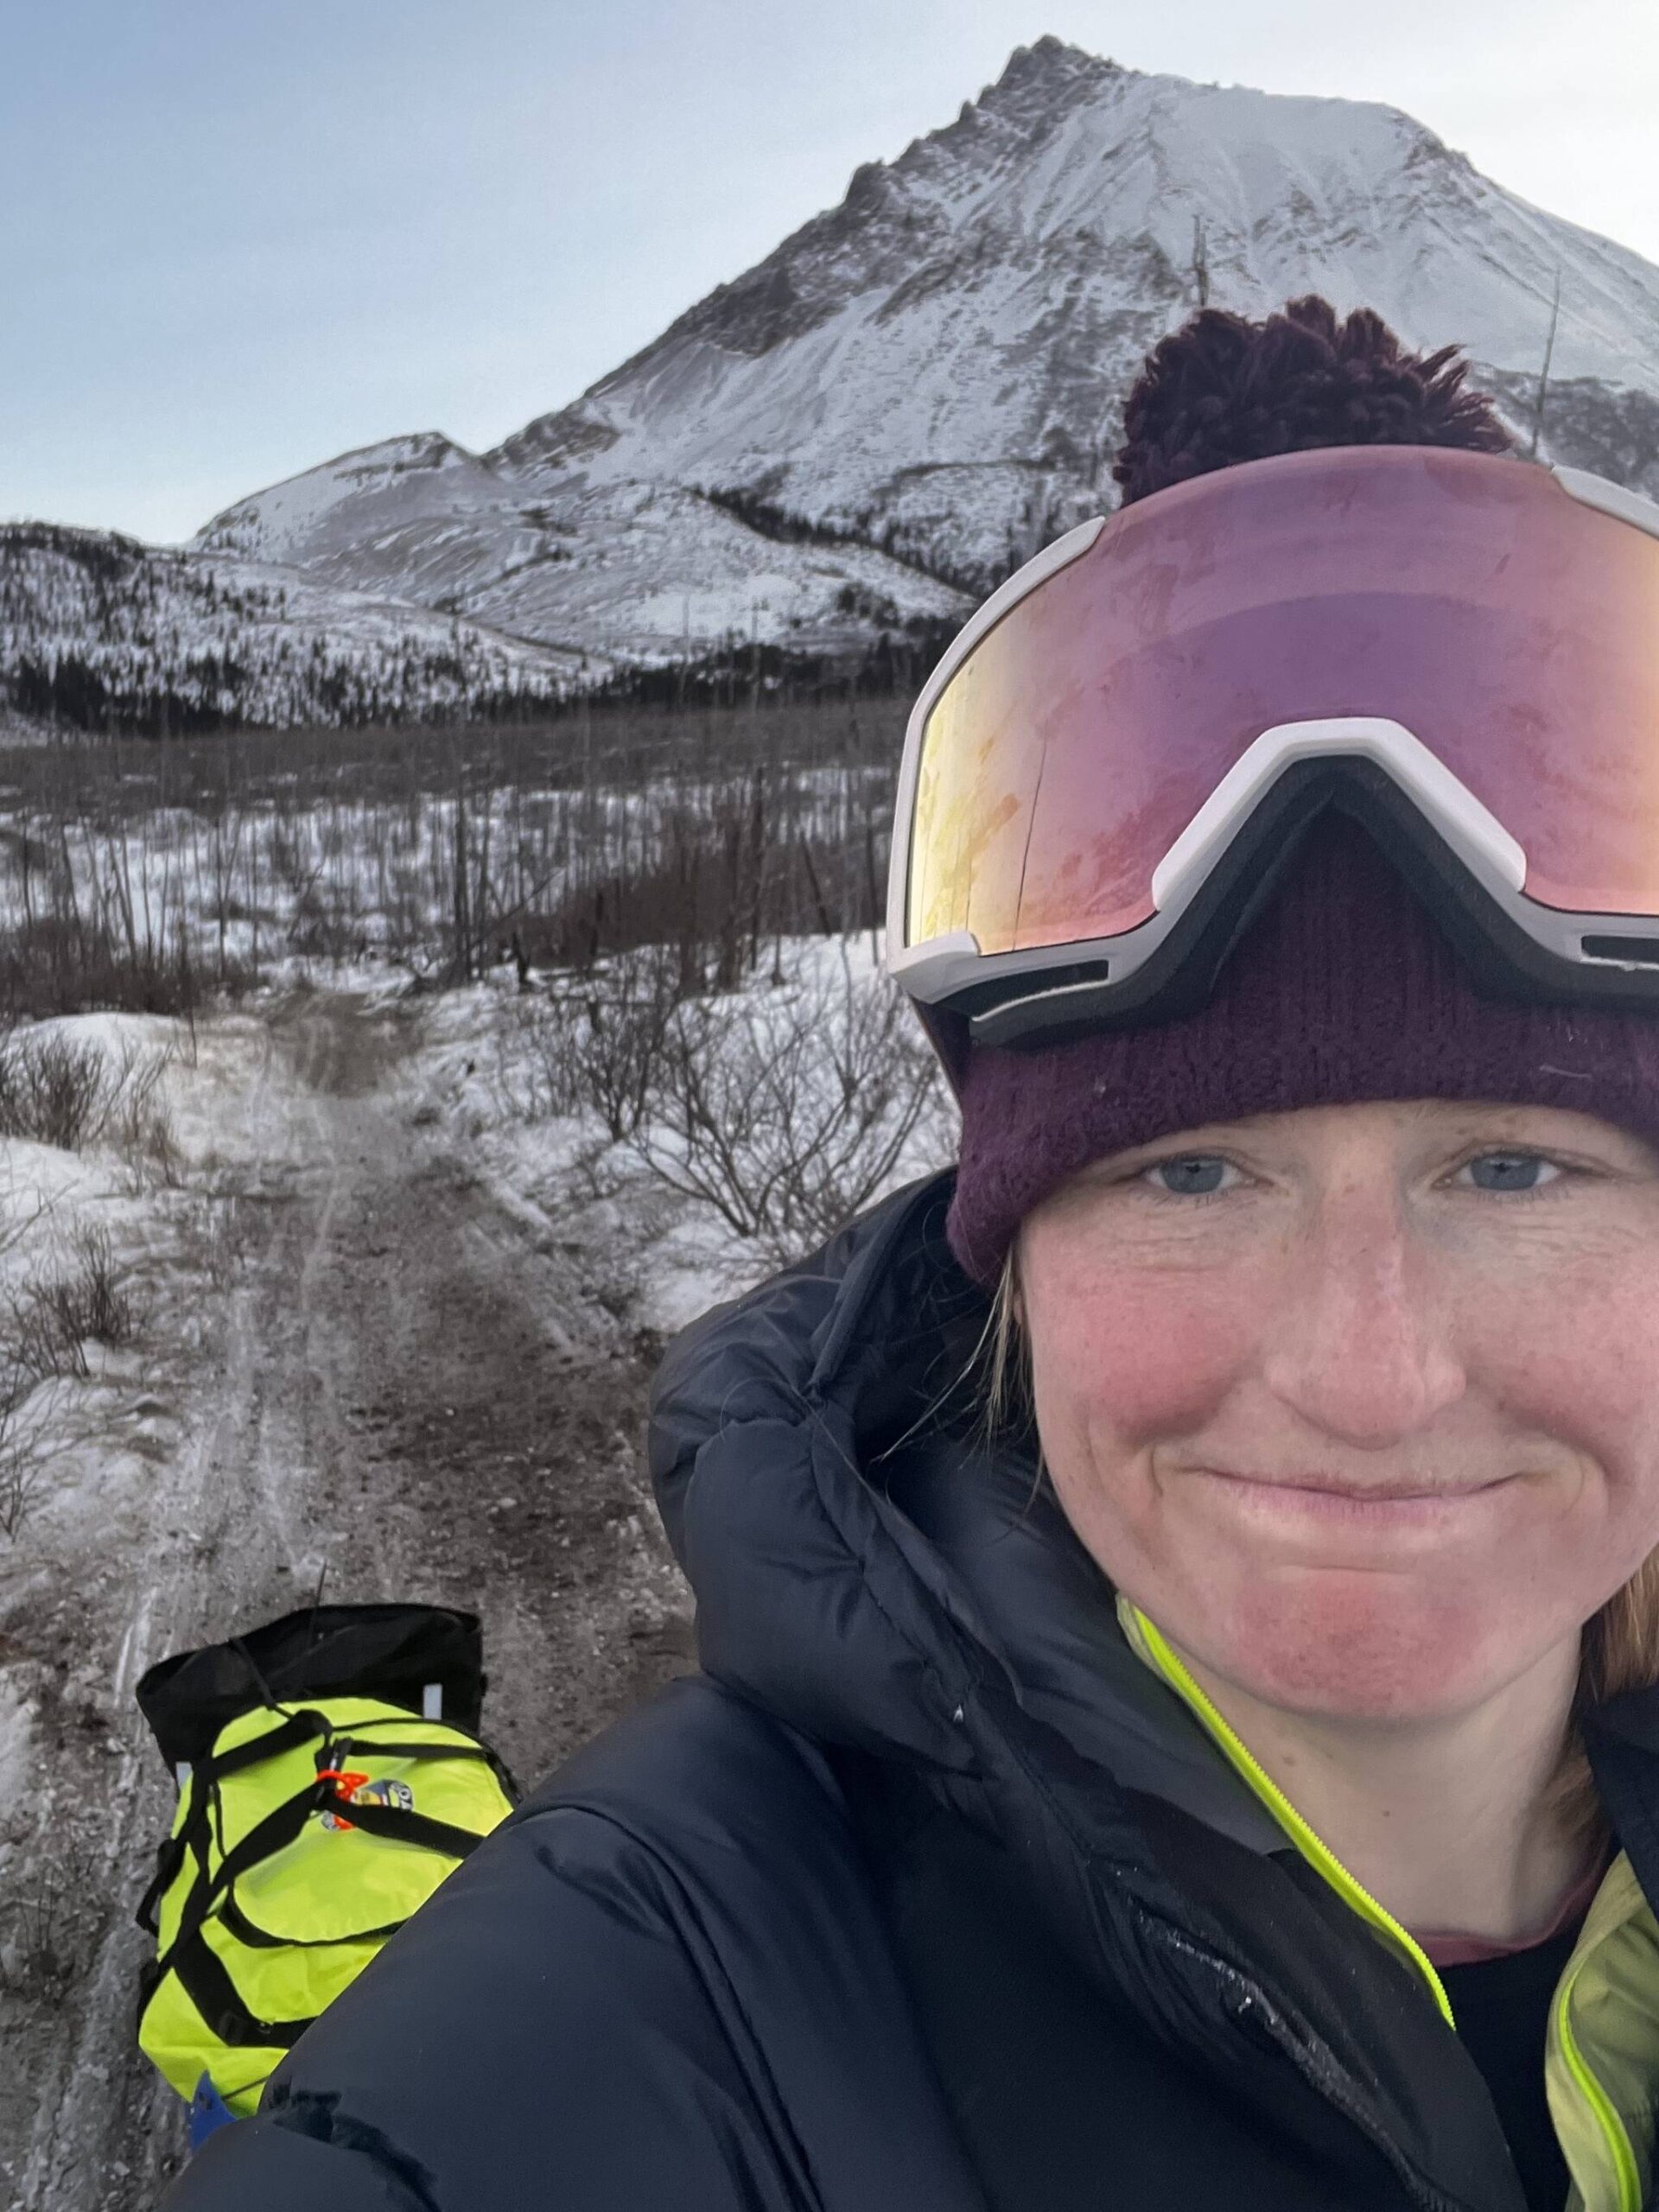 Jaclyn Arndt takes a selfie, showing trail conditions in the 2023 Iditarod Trail Invitational. (Photo provided by Jaclyn Arndt)